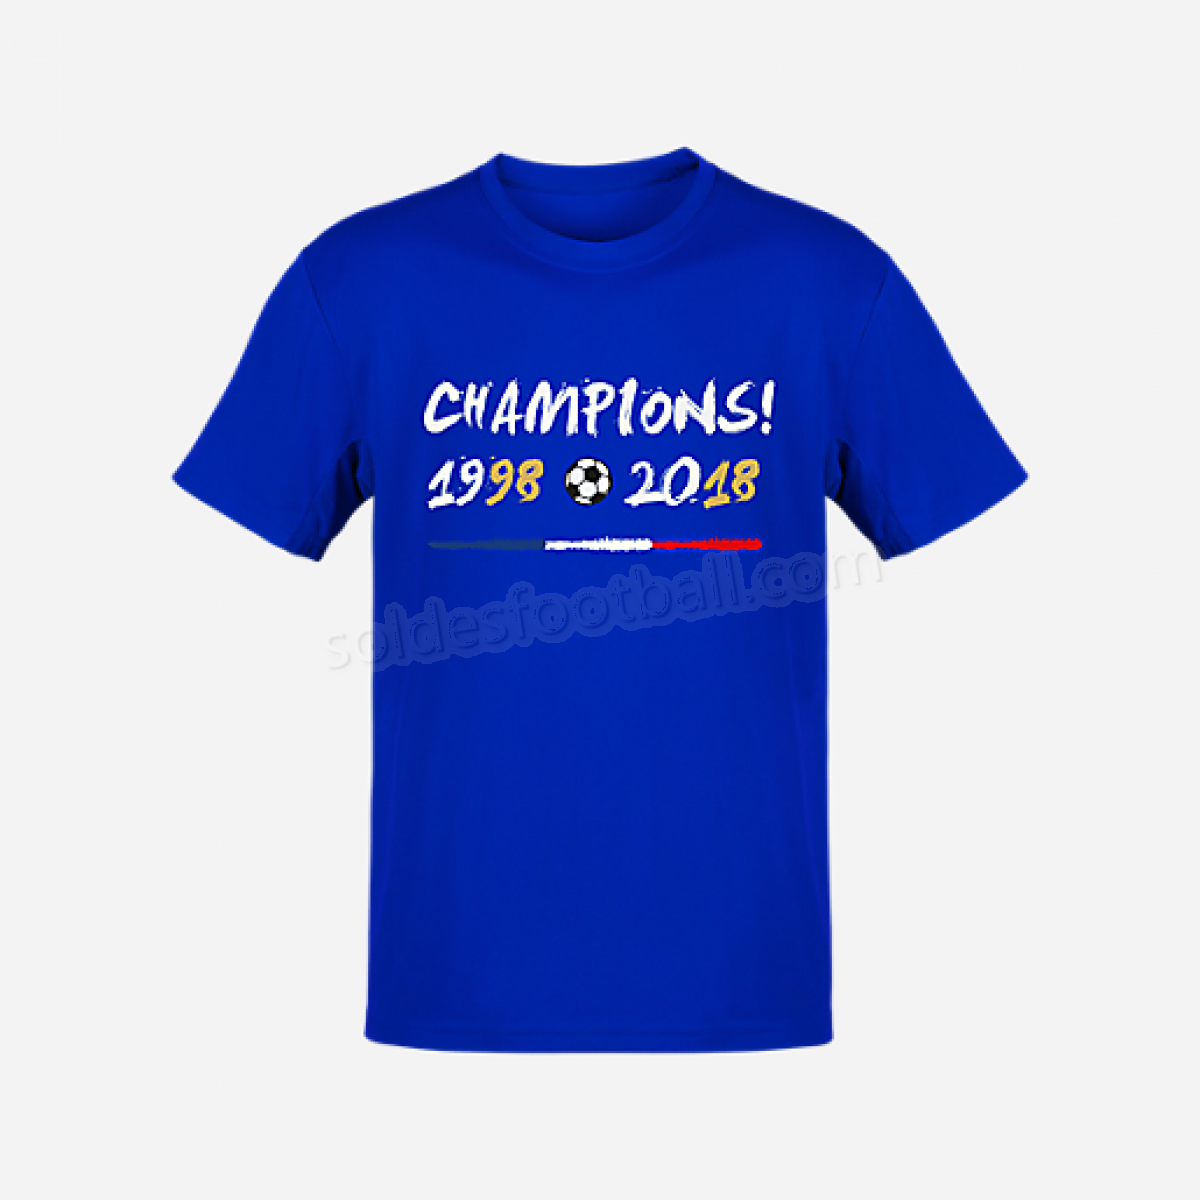 T-shirt football manches courtes homme champion BLANC- en solde - T-shirt football manches courtes homme champion BLANC- en solde